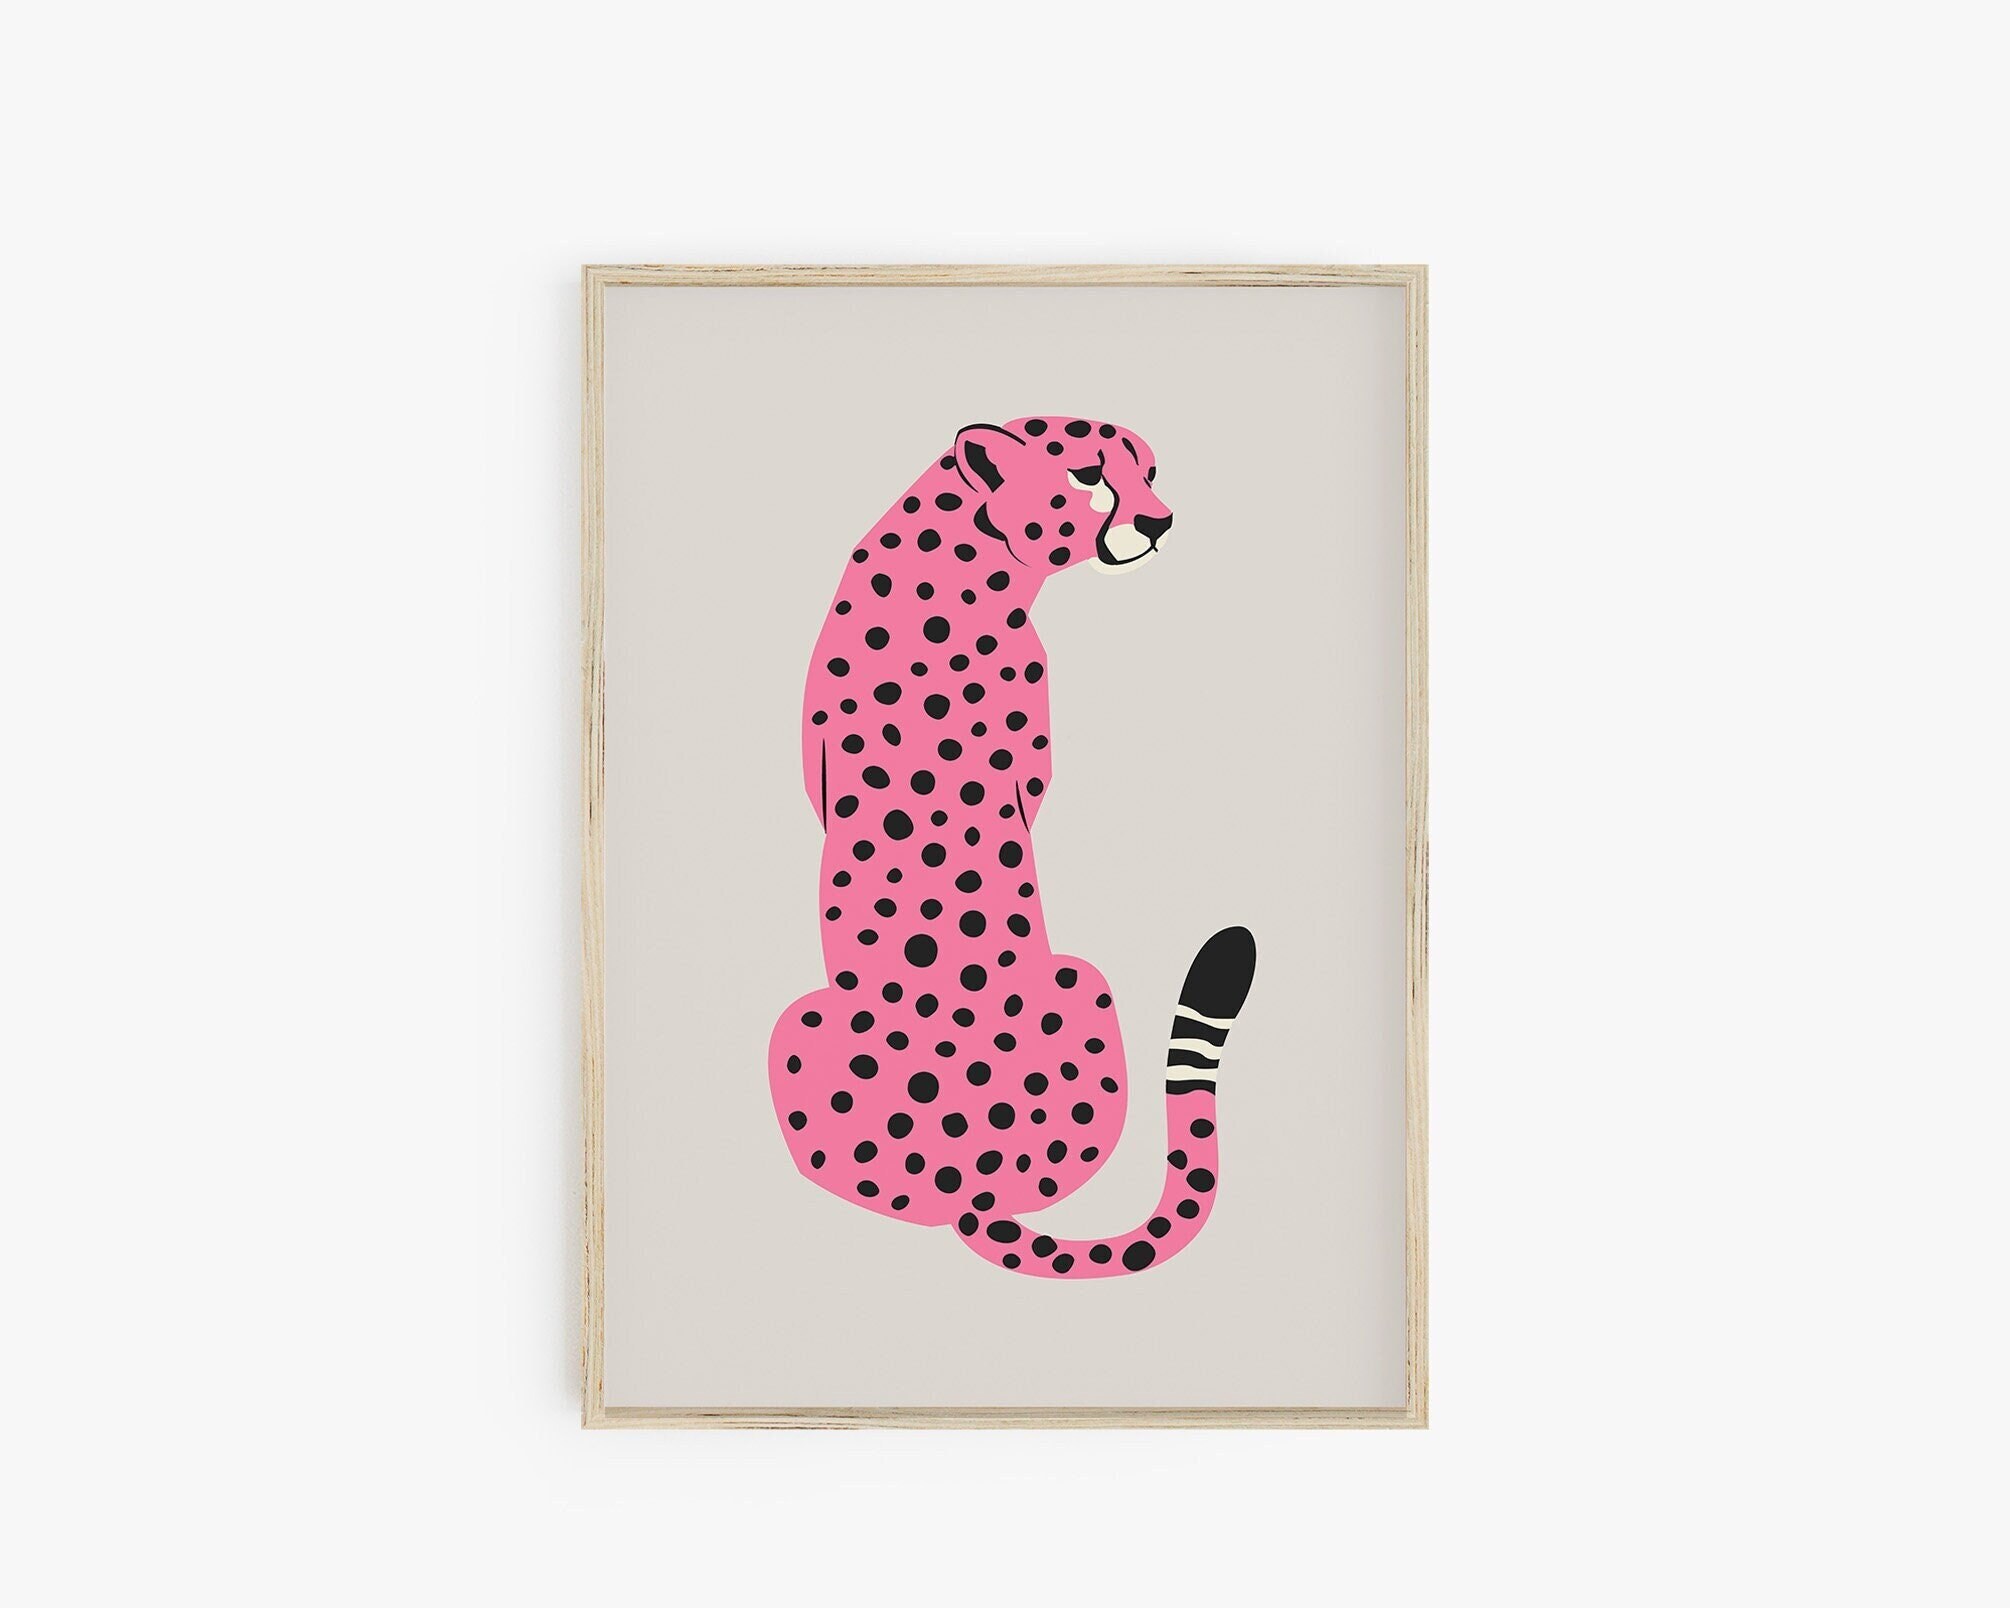 HAUS AND HUES Cheetah Print Wall Décor Pink Posters for Room Aesthetic  Blush Pink Cheetah Wall Art, Preppy Room Decor UNFRAMED 12” x 16” 